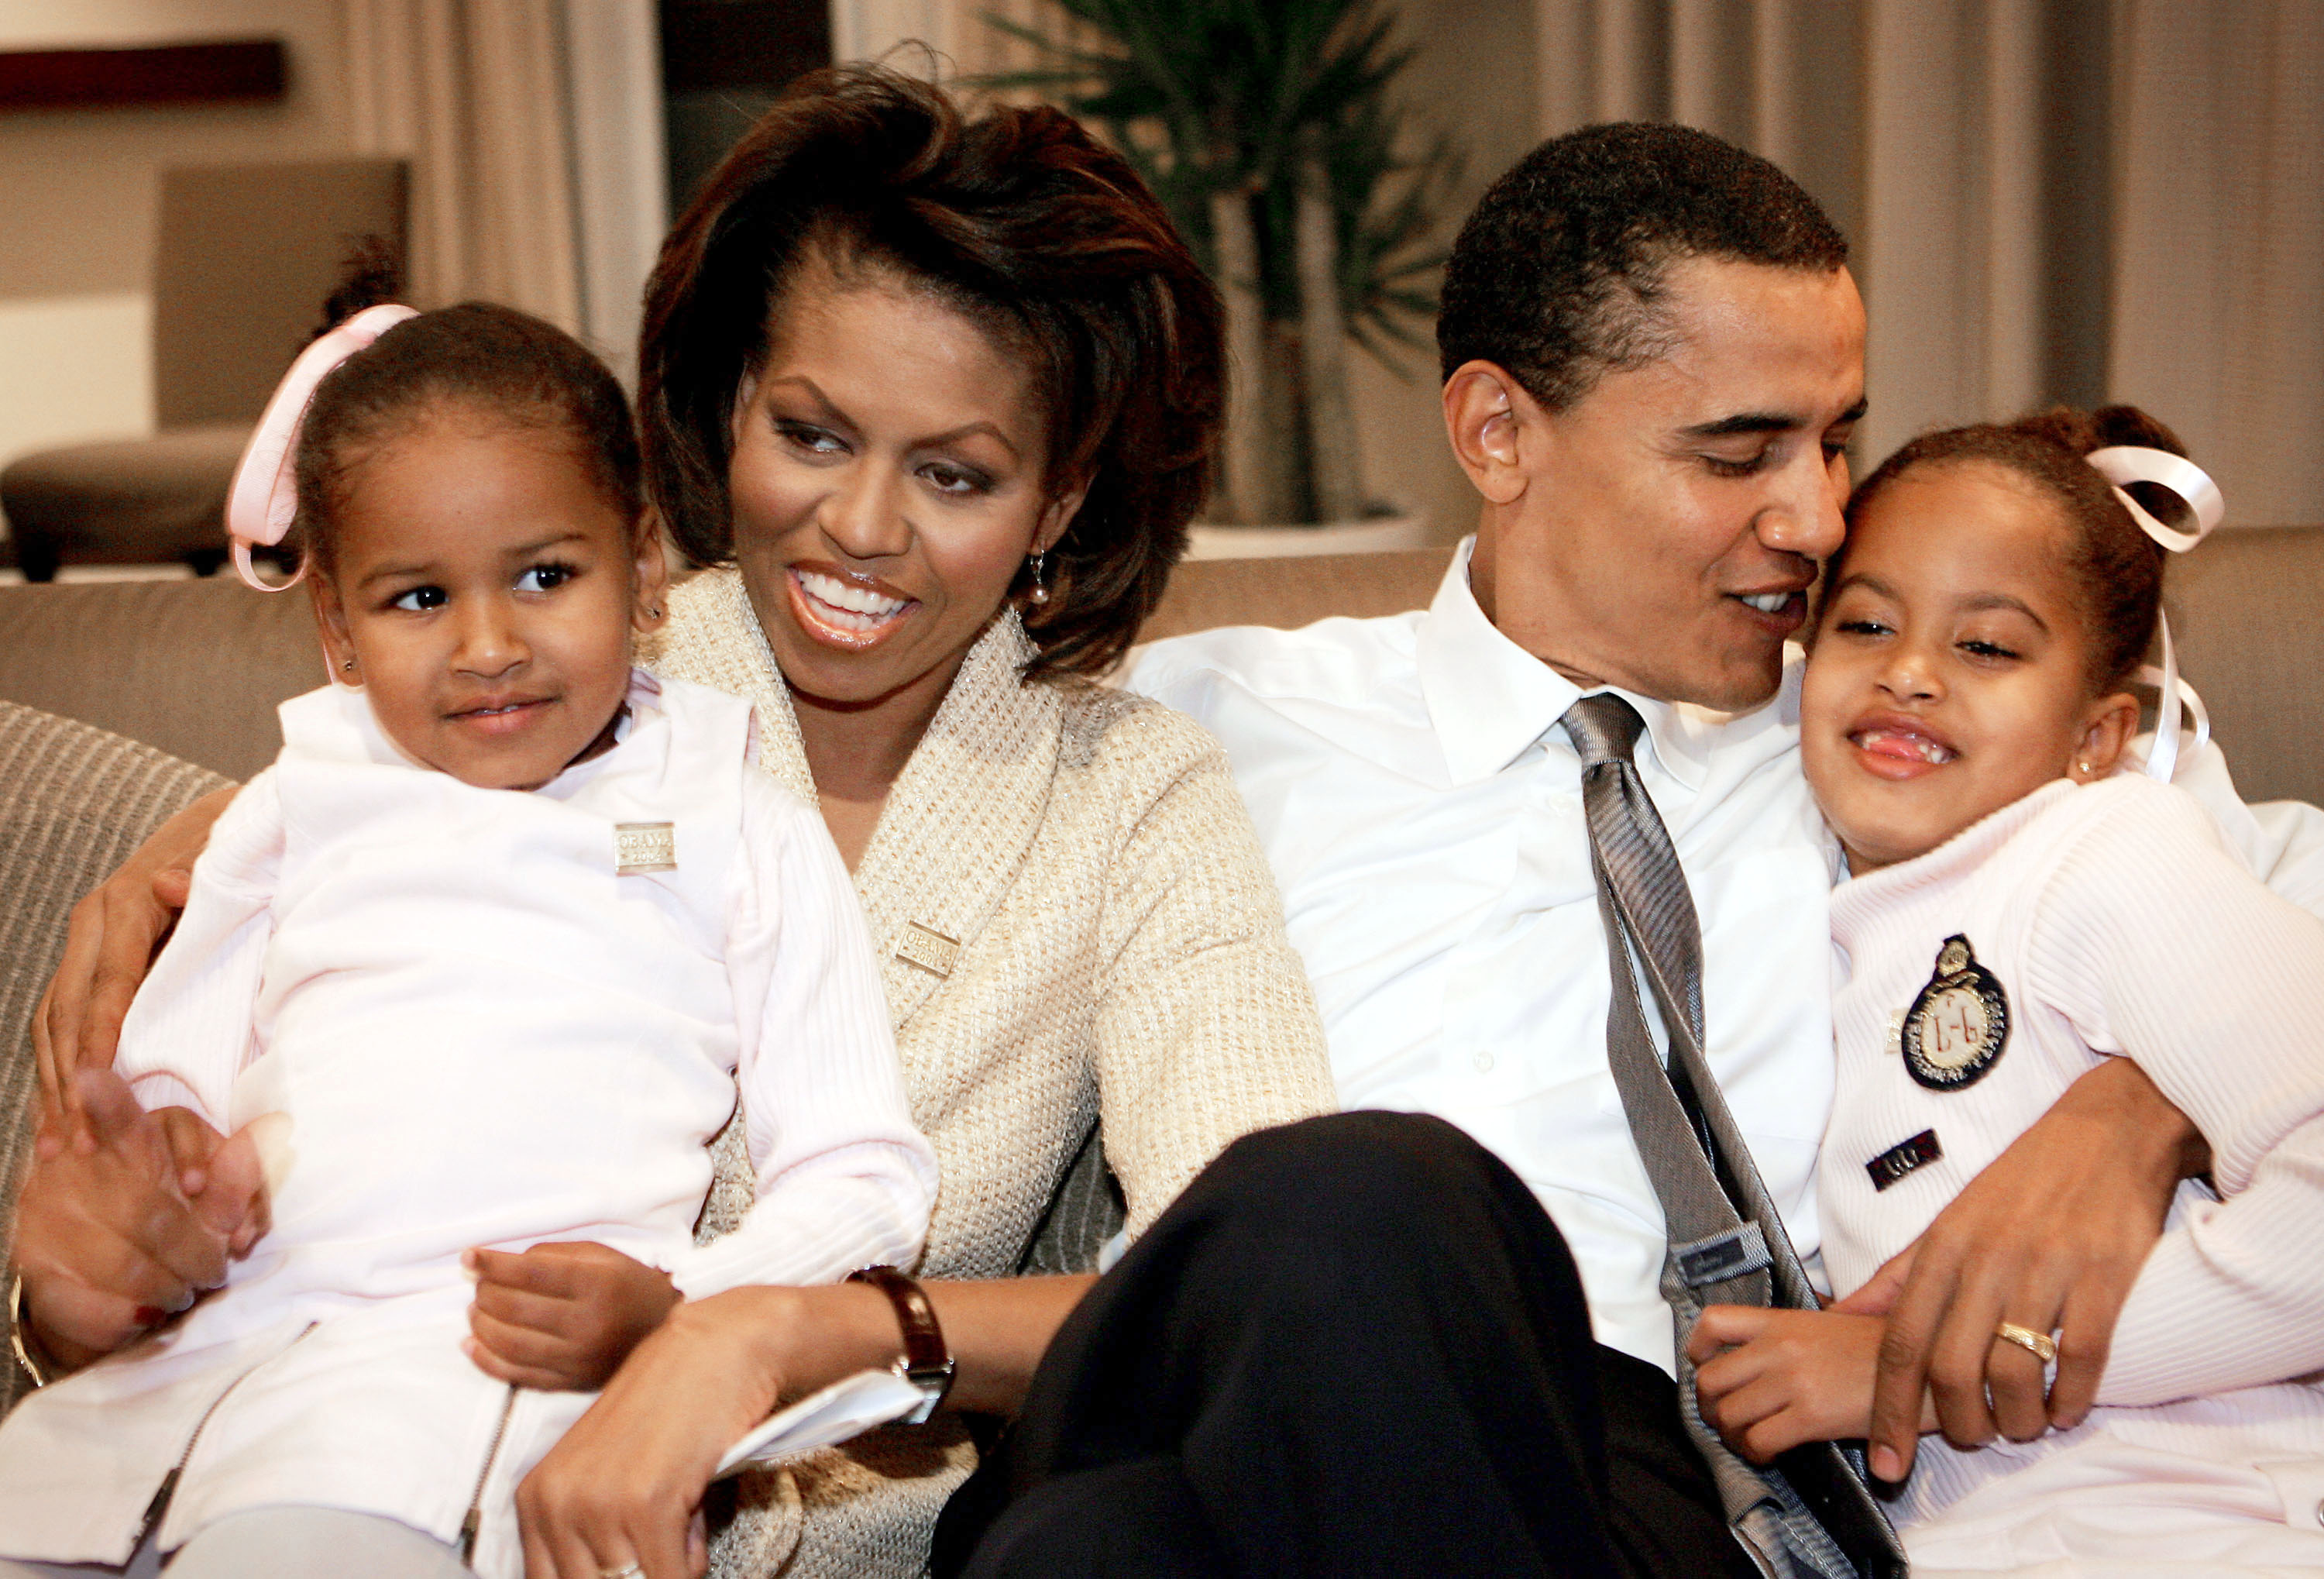 Sasha, Michelle, Barack, and Malia Obama in a hotel room as they wait for election returns to come in Chicago, Illinois on November 2, 2004. | Source: Getty Images